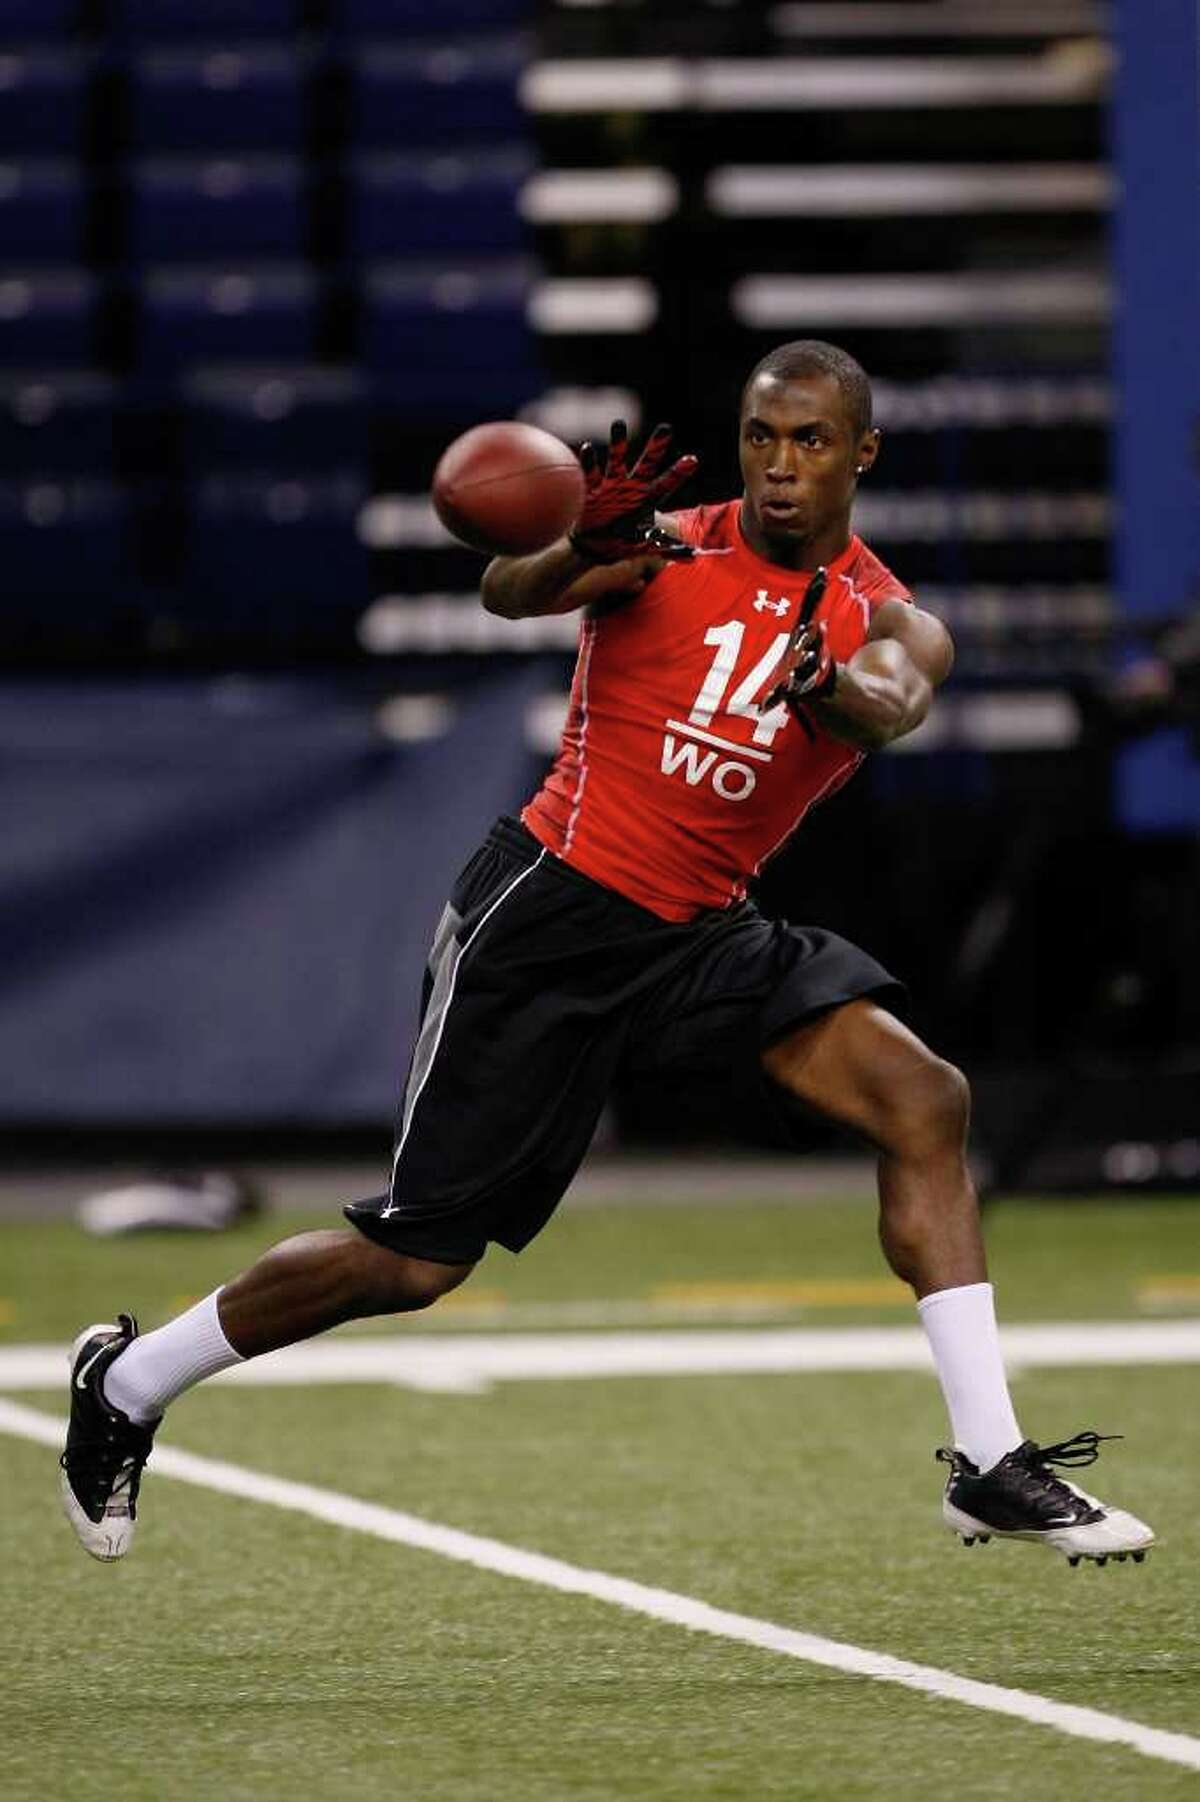 INDIANAPOLIS, IN - FEBRUARY 28: Wide receiver Marcus Easley of Connecticut catches the football during the NFL Scouting Combine presented by Under Armour at Lucas Oil Stadium on February 28, 2010 in Indianapolis, Indiana. (Photo by Scott Boehm/Getty Images) *** Local Caption *** Marcus Easley